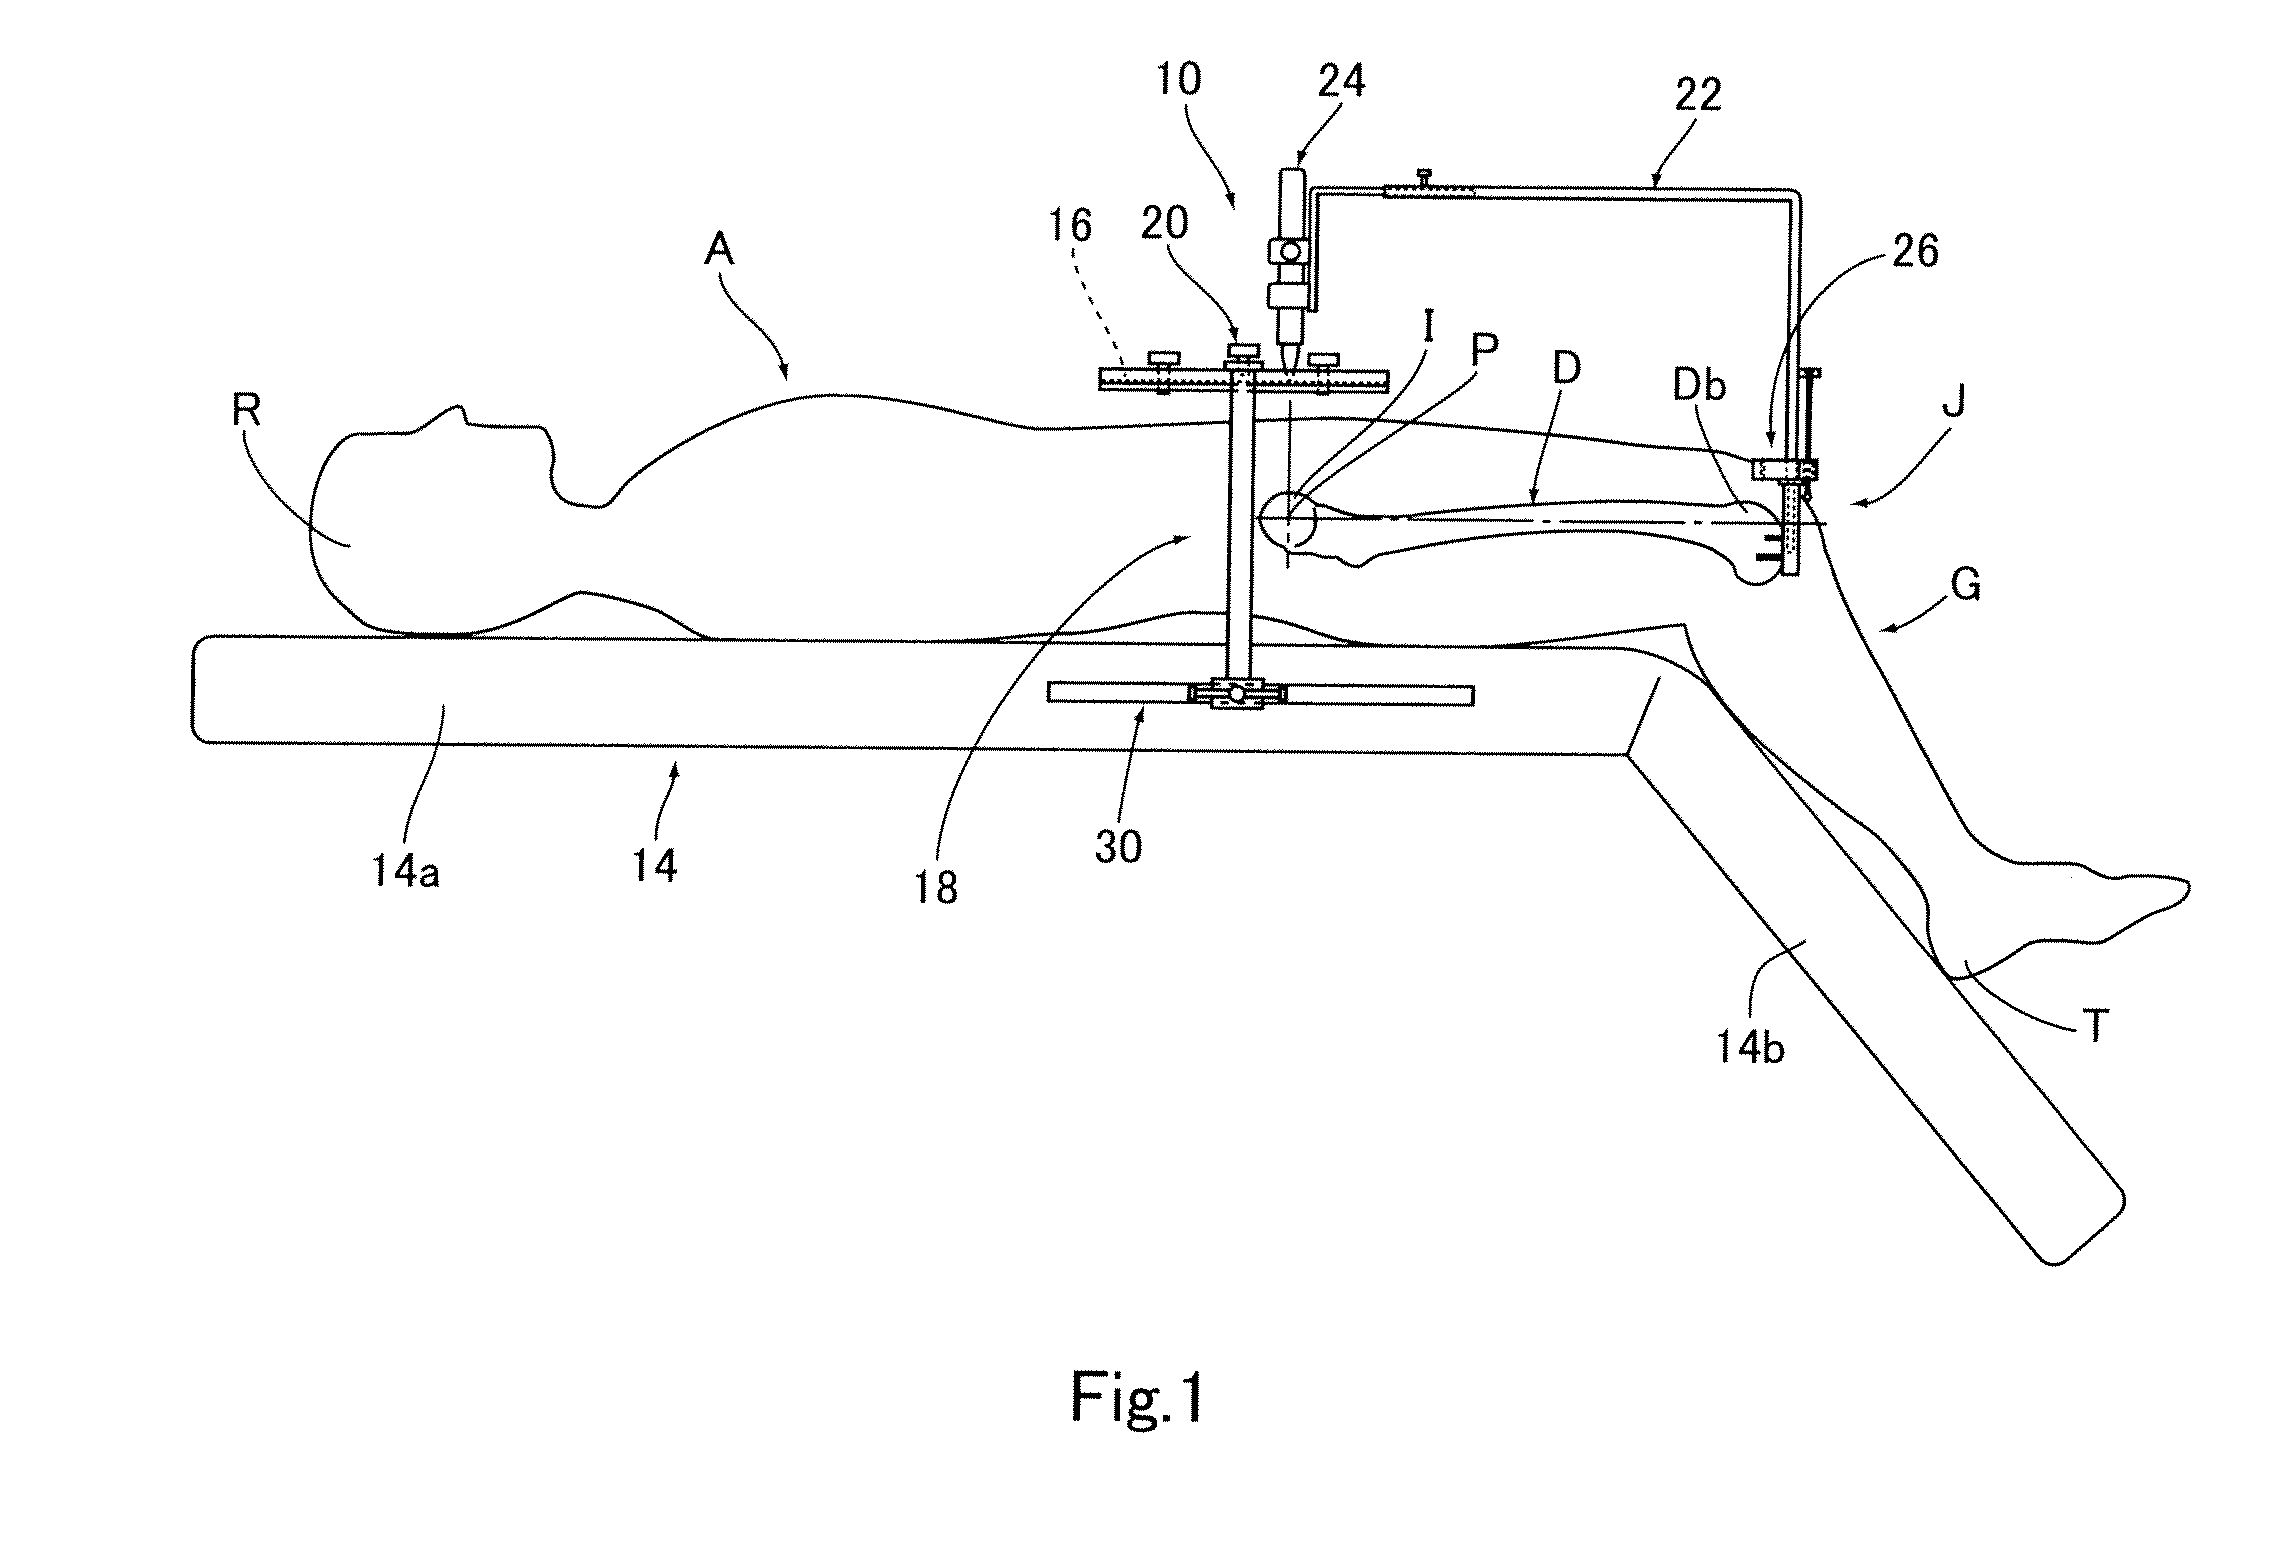 Apparatus for identifying femoral head center